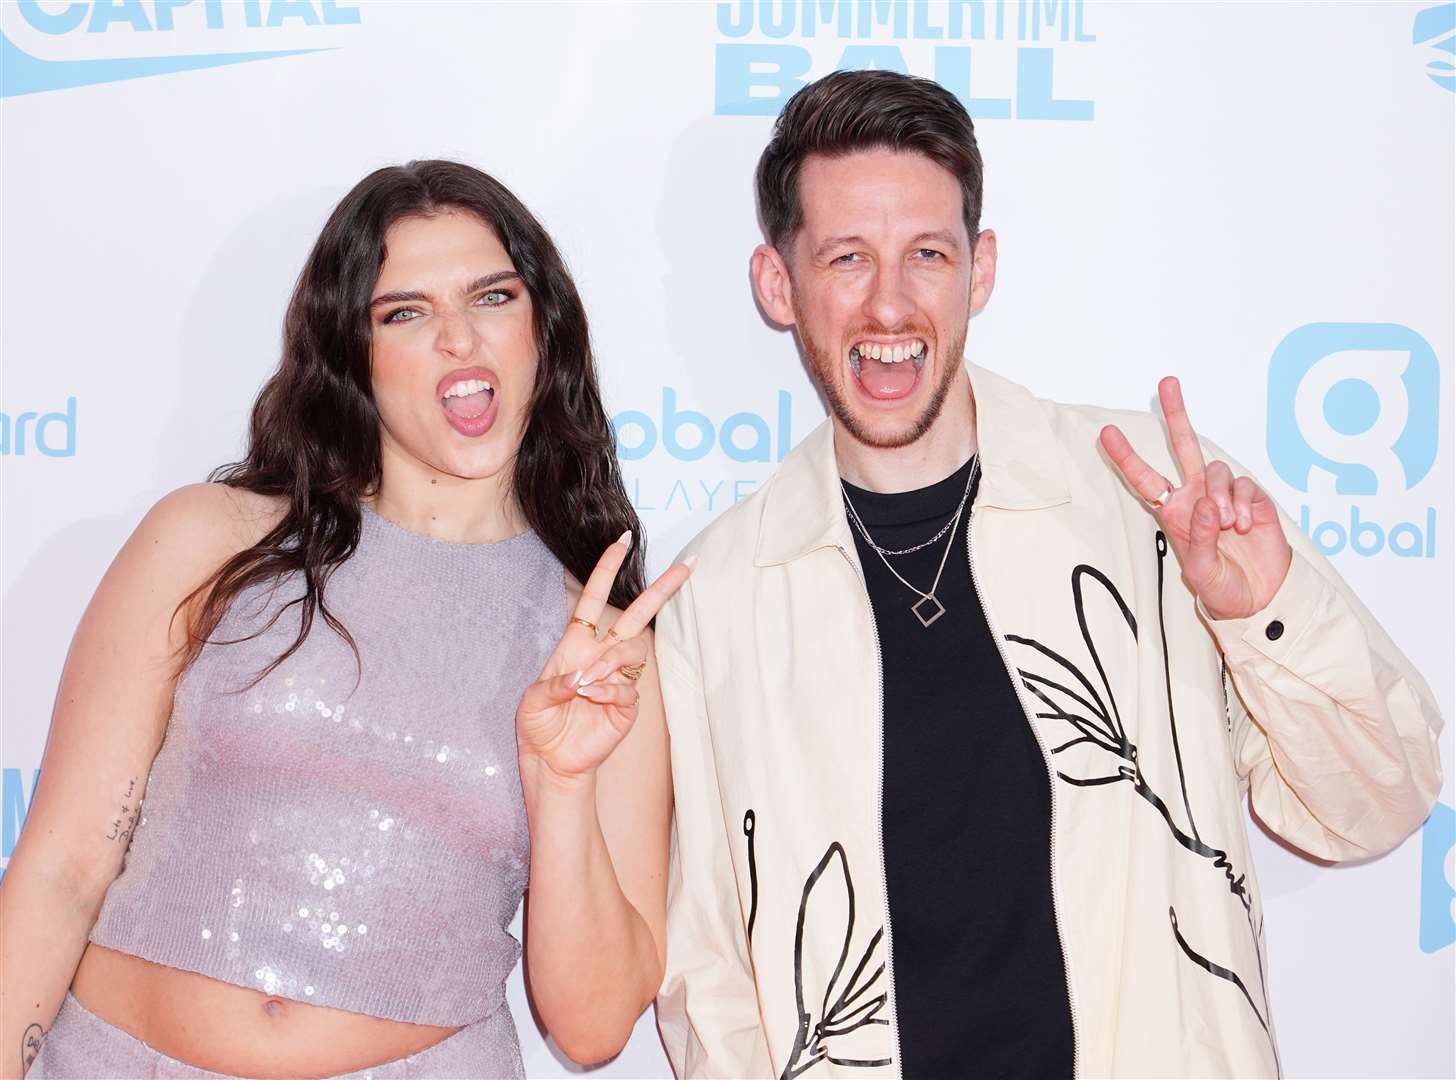 Mae Muller and Sigala backstage during Capital’s Summertime Ball (Ian West/PA)